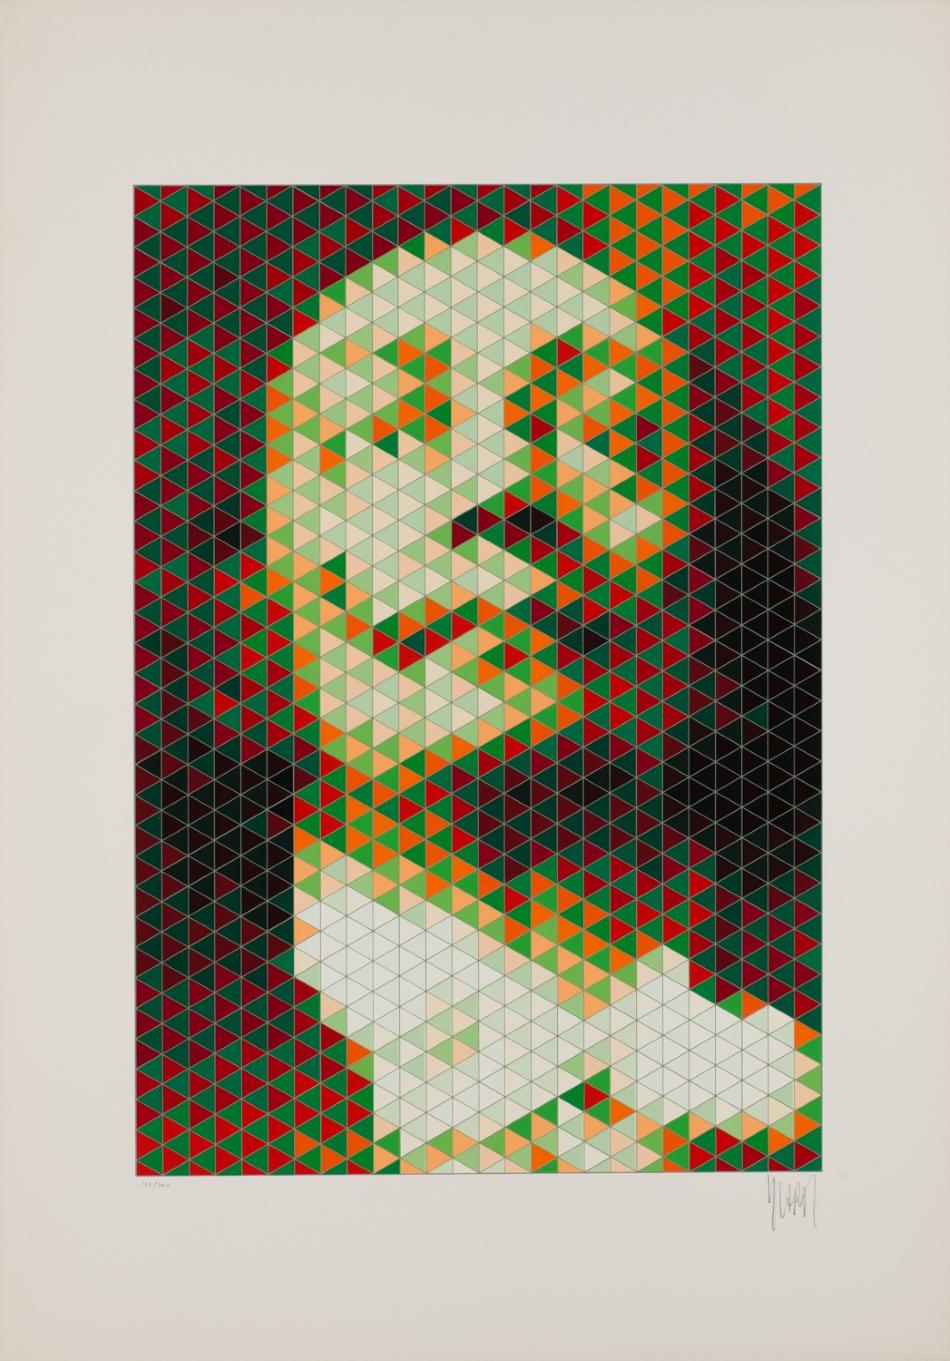 Faces of Dali #4 - Print by Yvaral (Jean-Pierre Vasarely)